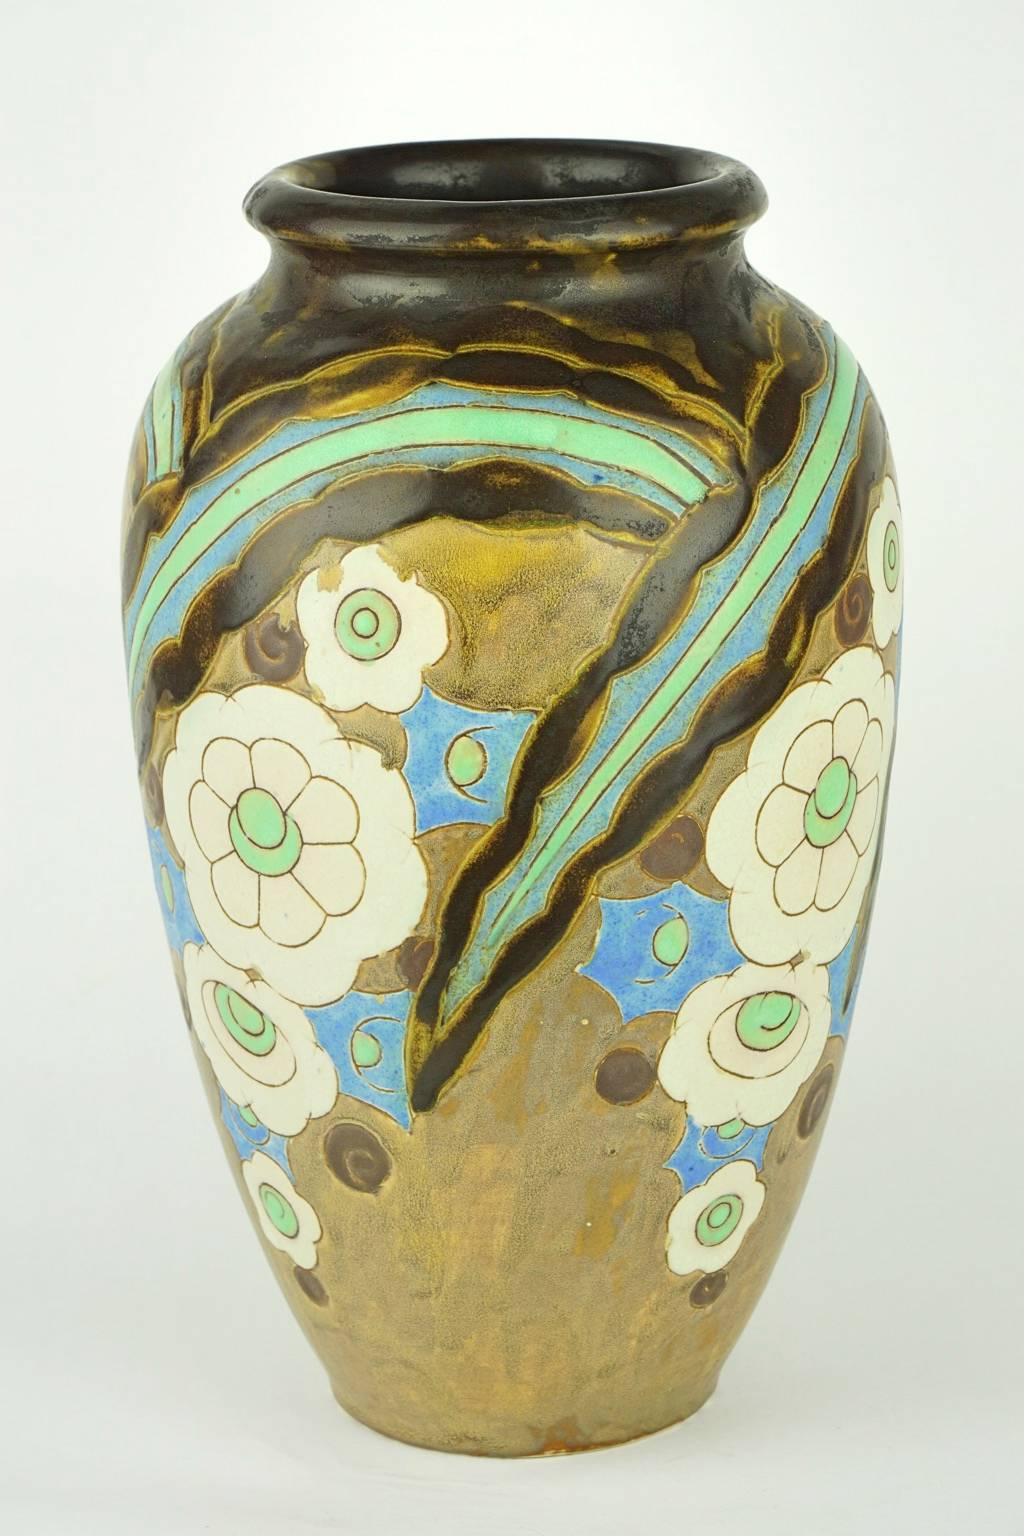 A rather large Art Deco Keramis vase by Charles Catteau with pattern of abstract flowers. Design 1211. Form 911.

Measure: Diameter top 13.4 cm. Diameter base 11 cm. Height 33.9 cm.